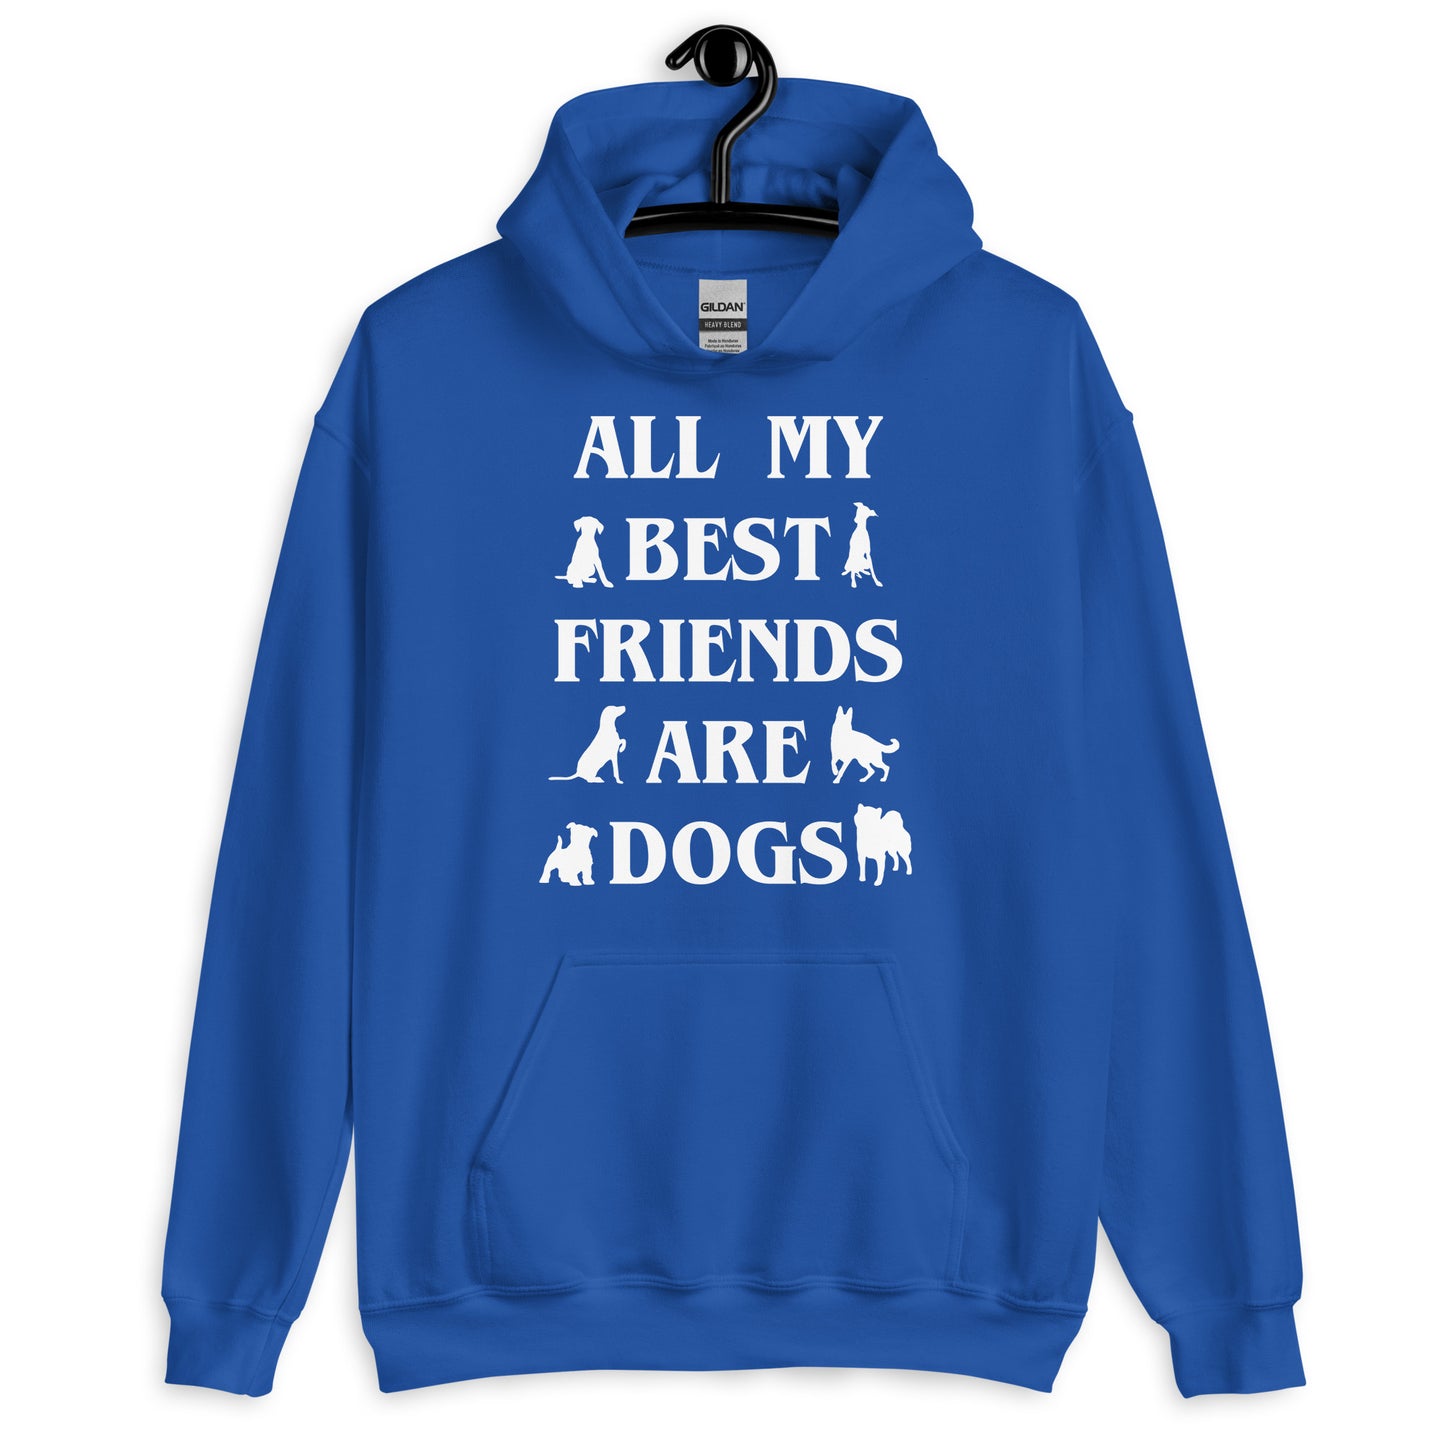 All My Best Friends are Dogs Hoodie